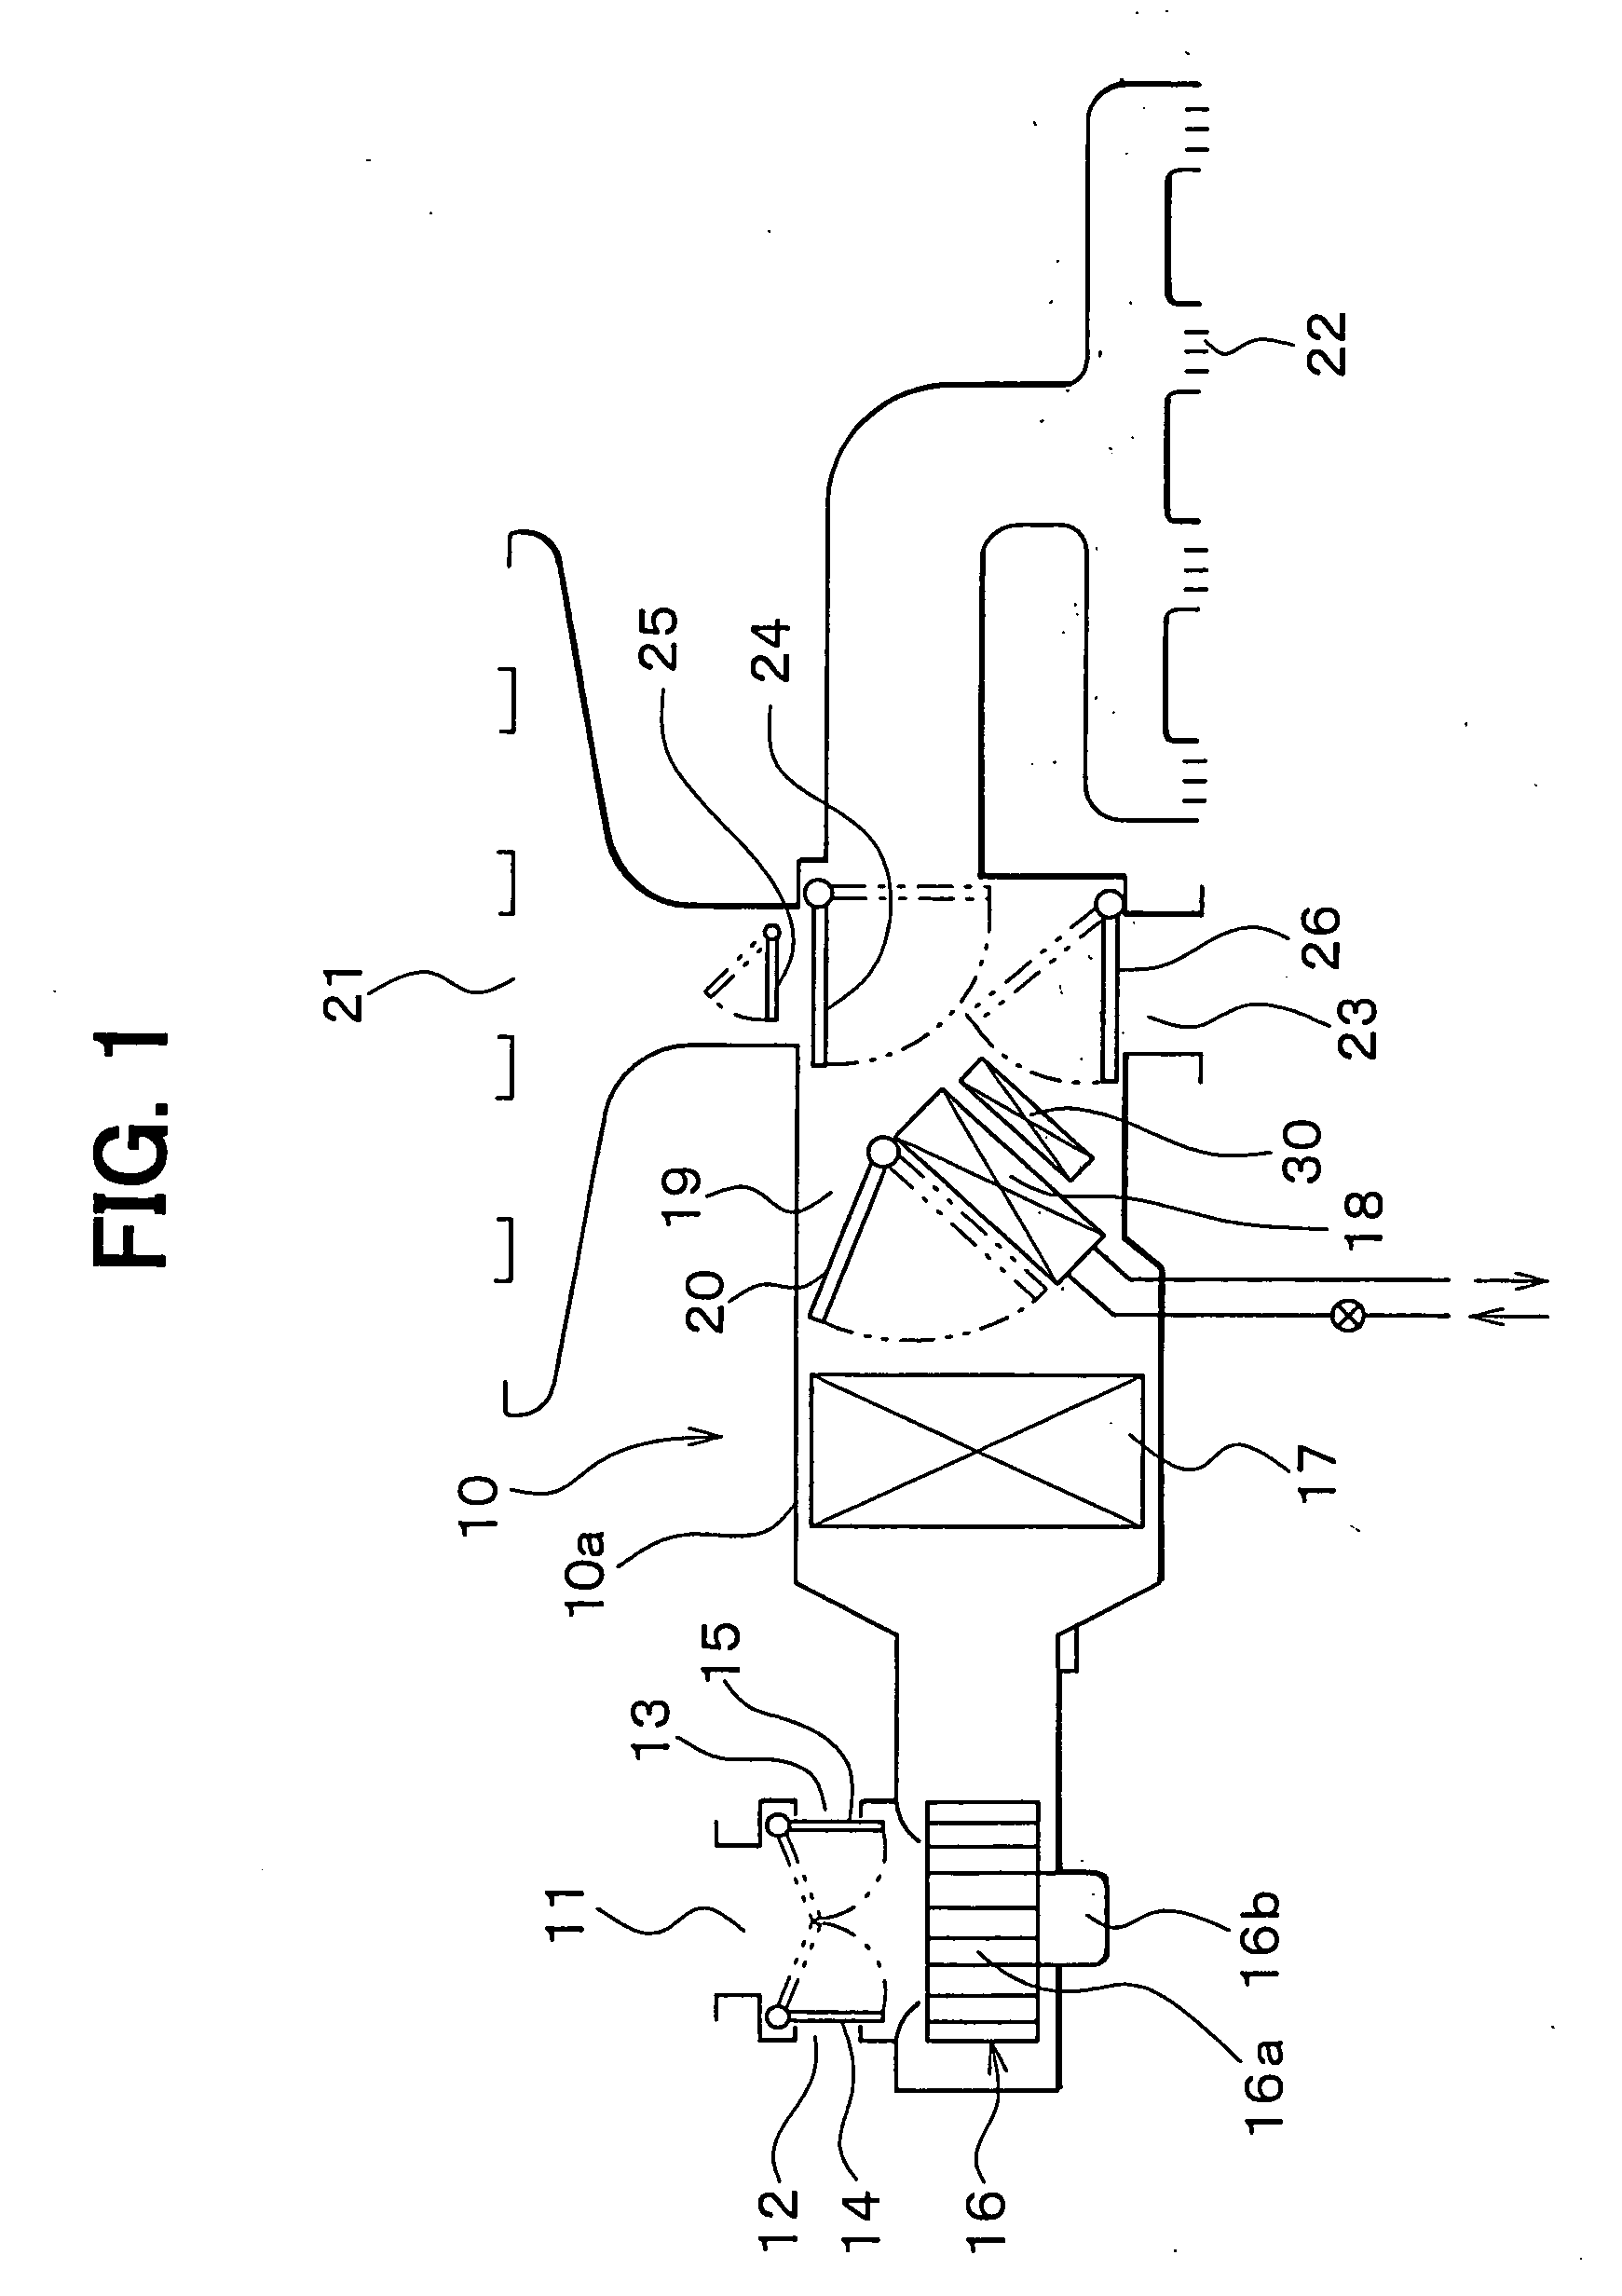 Electrical heater, heating heat exchanger and vehicle air conditioner